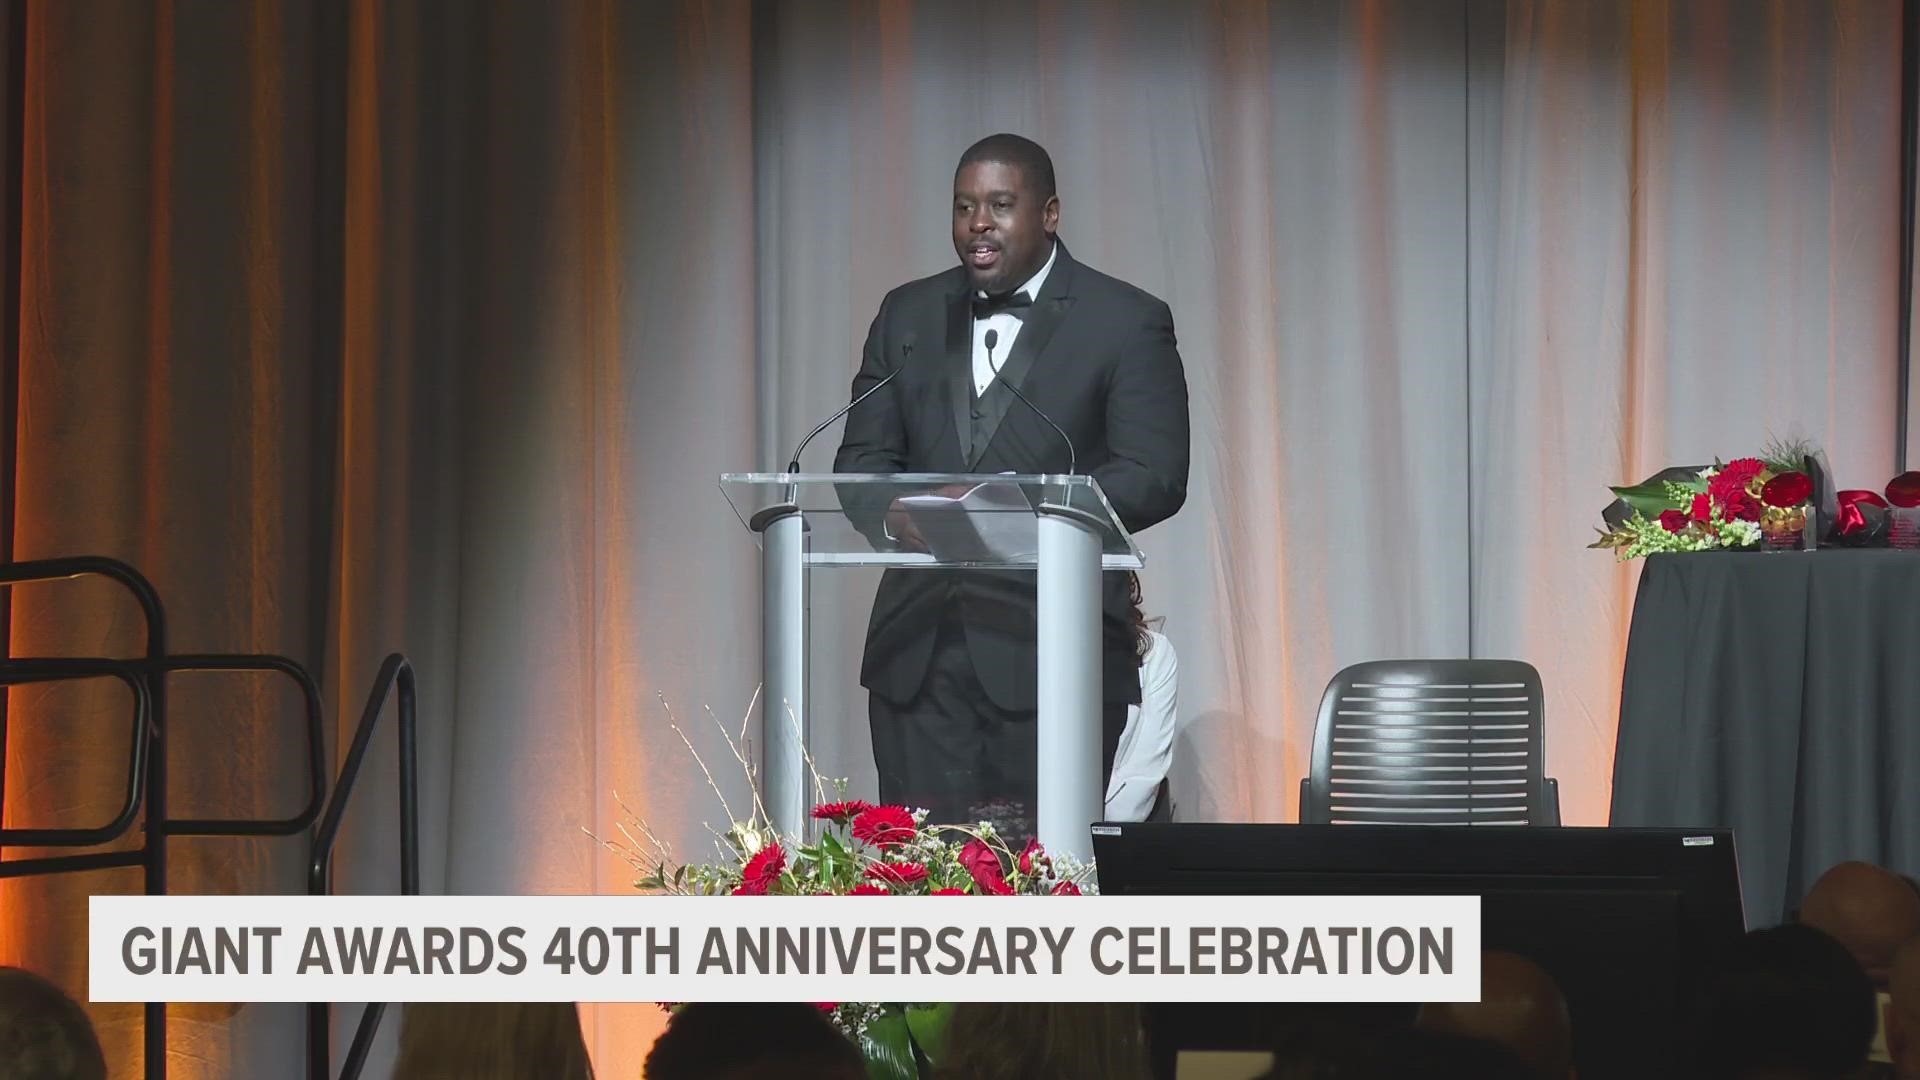 Tonight at the DeVos Place, the Black leaders and organizations were honored for their work in their communities.